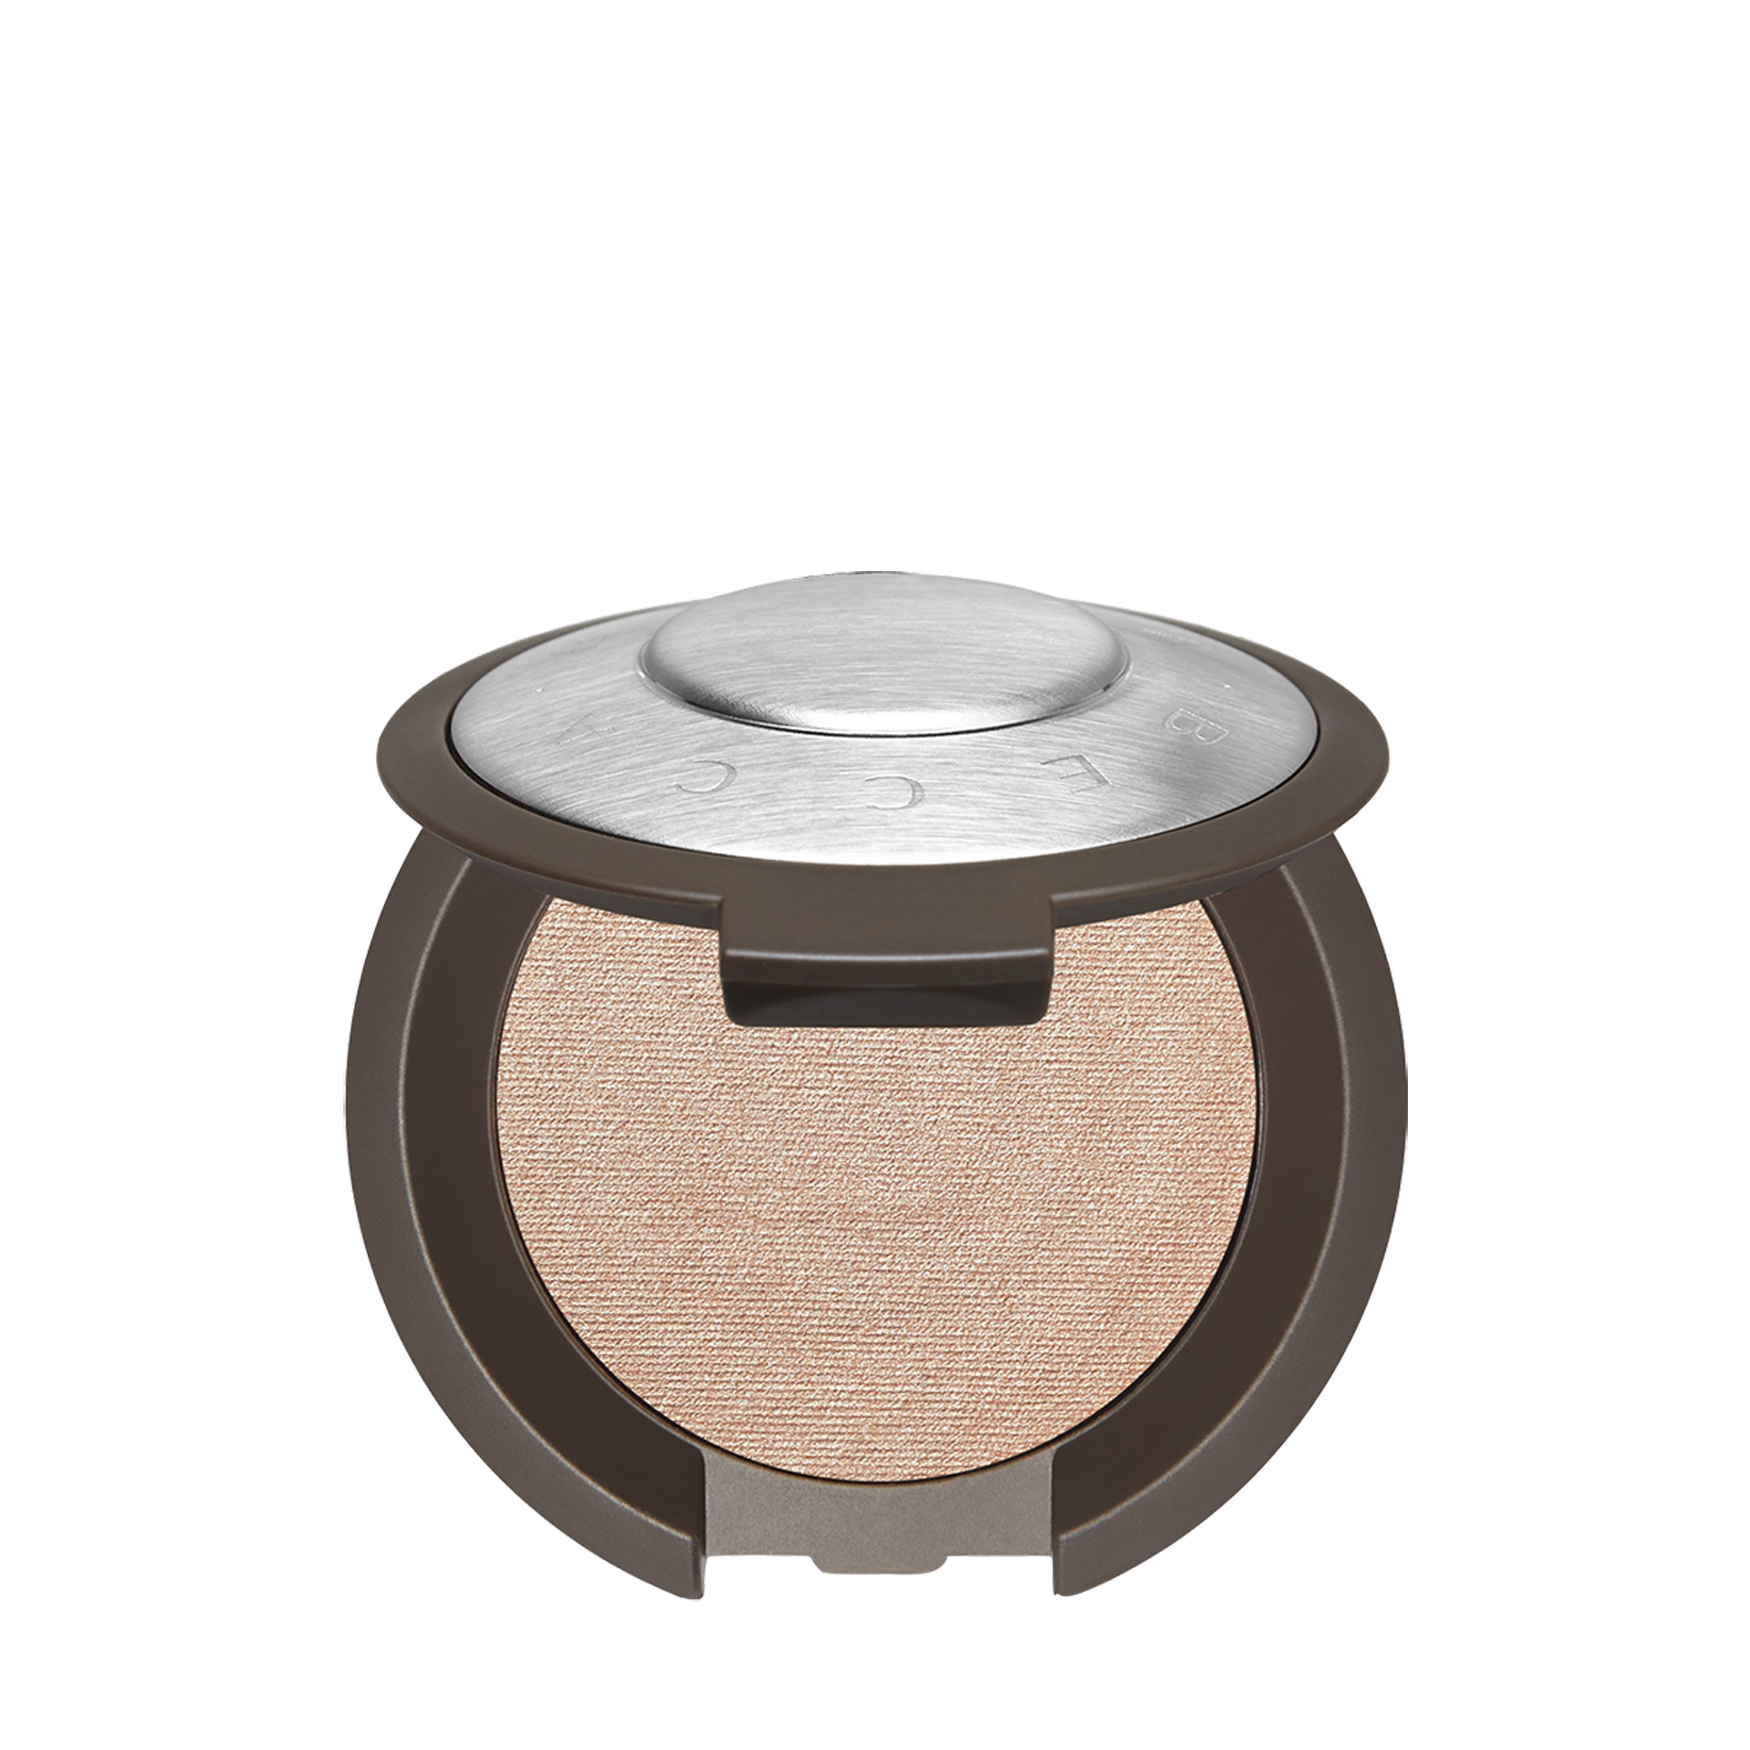 Becca Shimmering Skin Perfector Pressed Highlighter Mini | Space NK